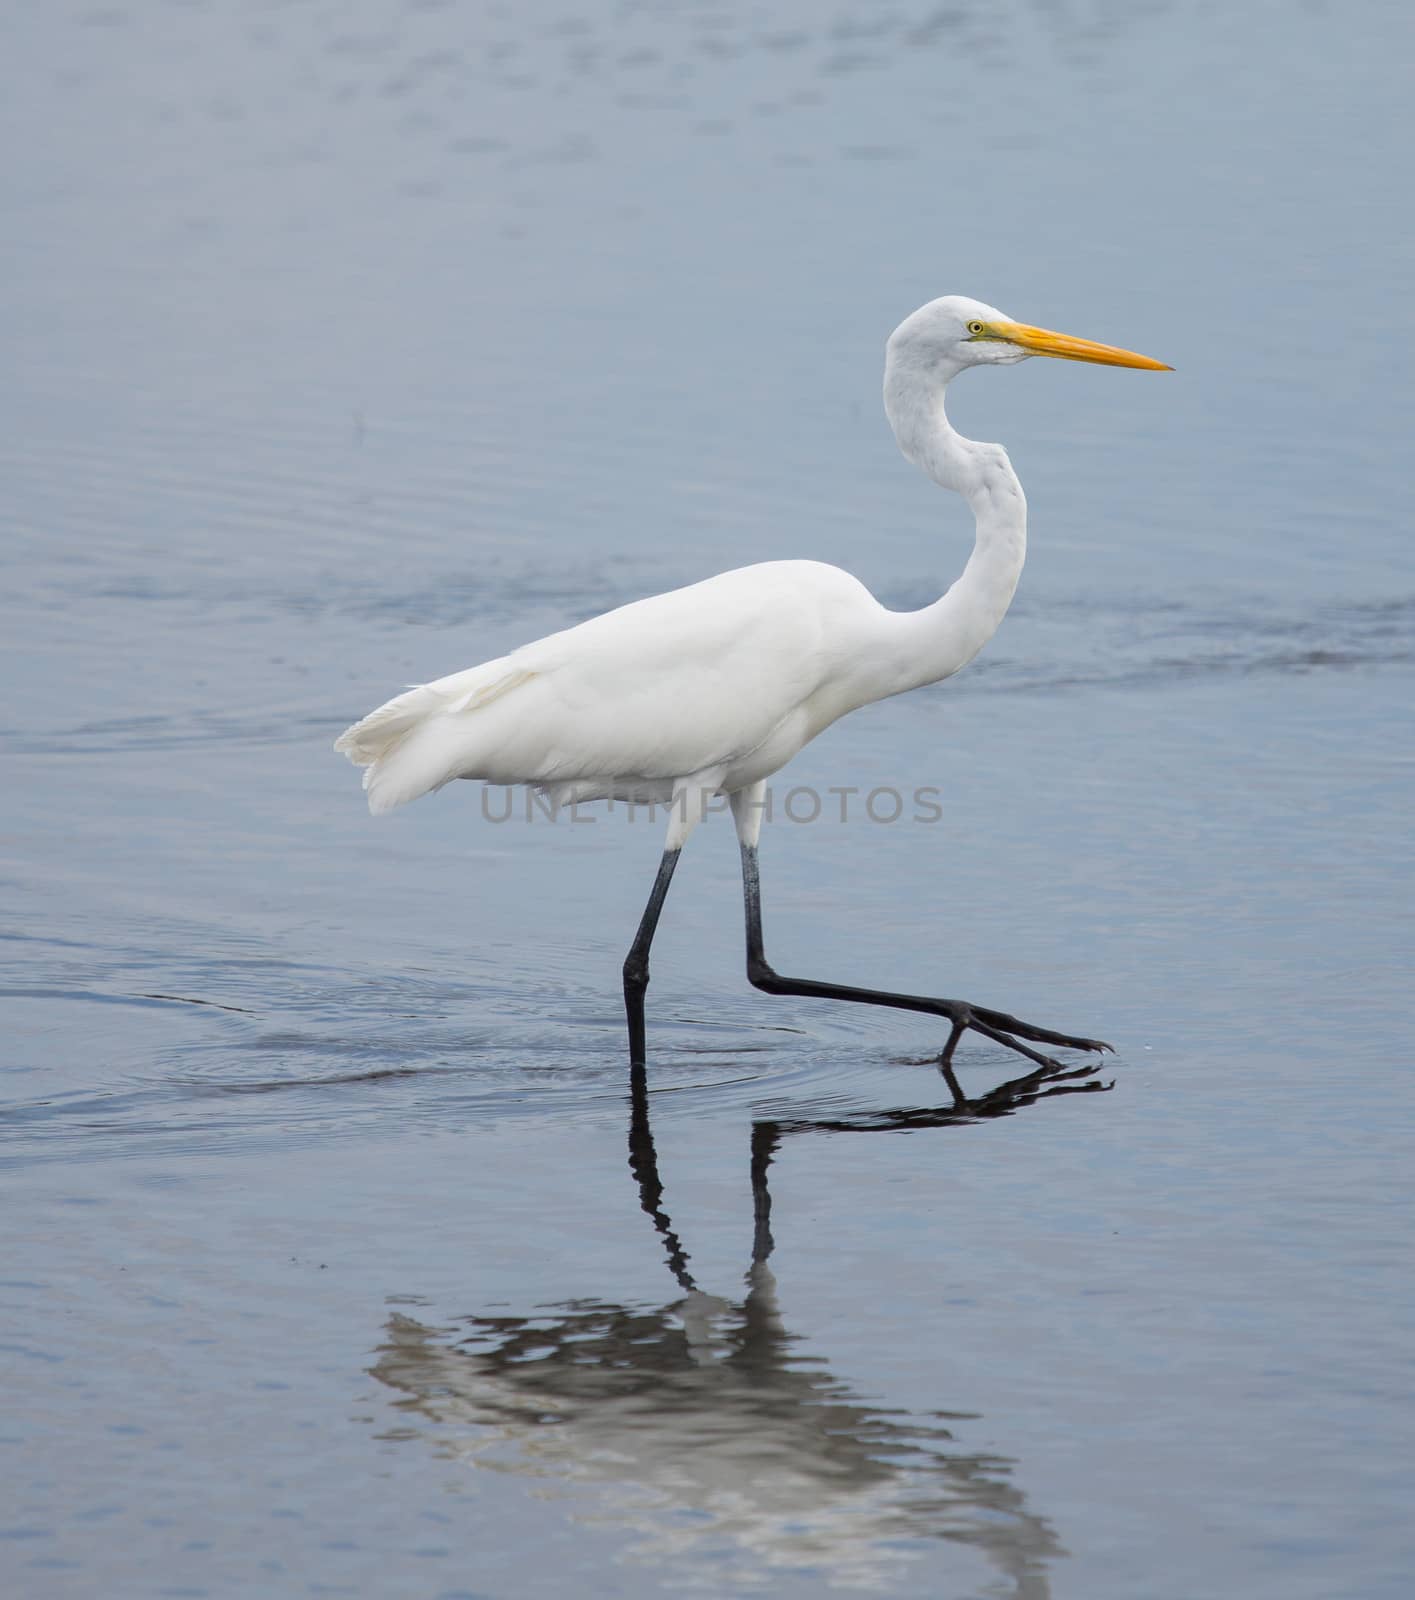 This Great Egret is striding purposely across the wetlands.